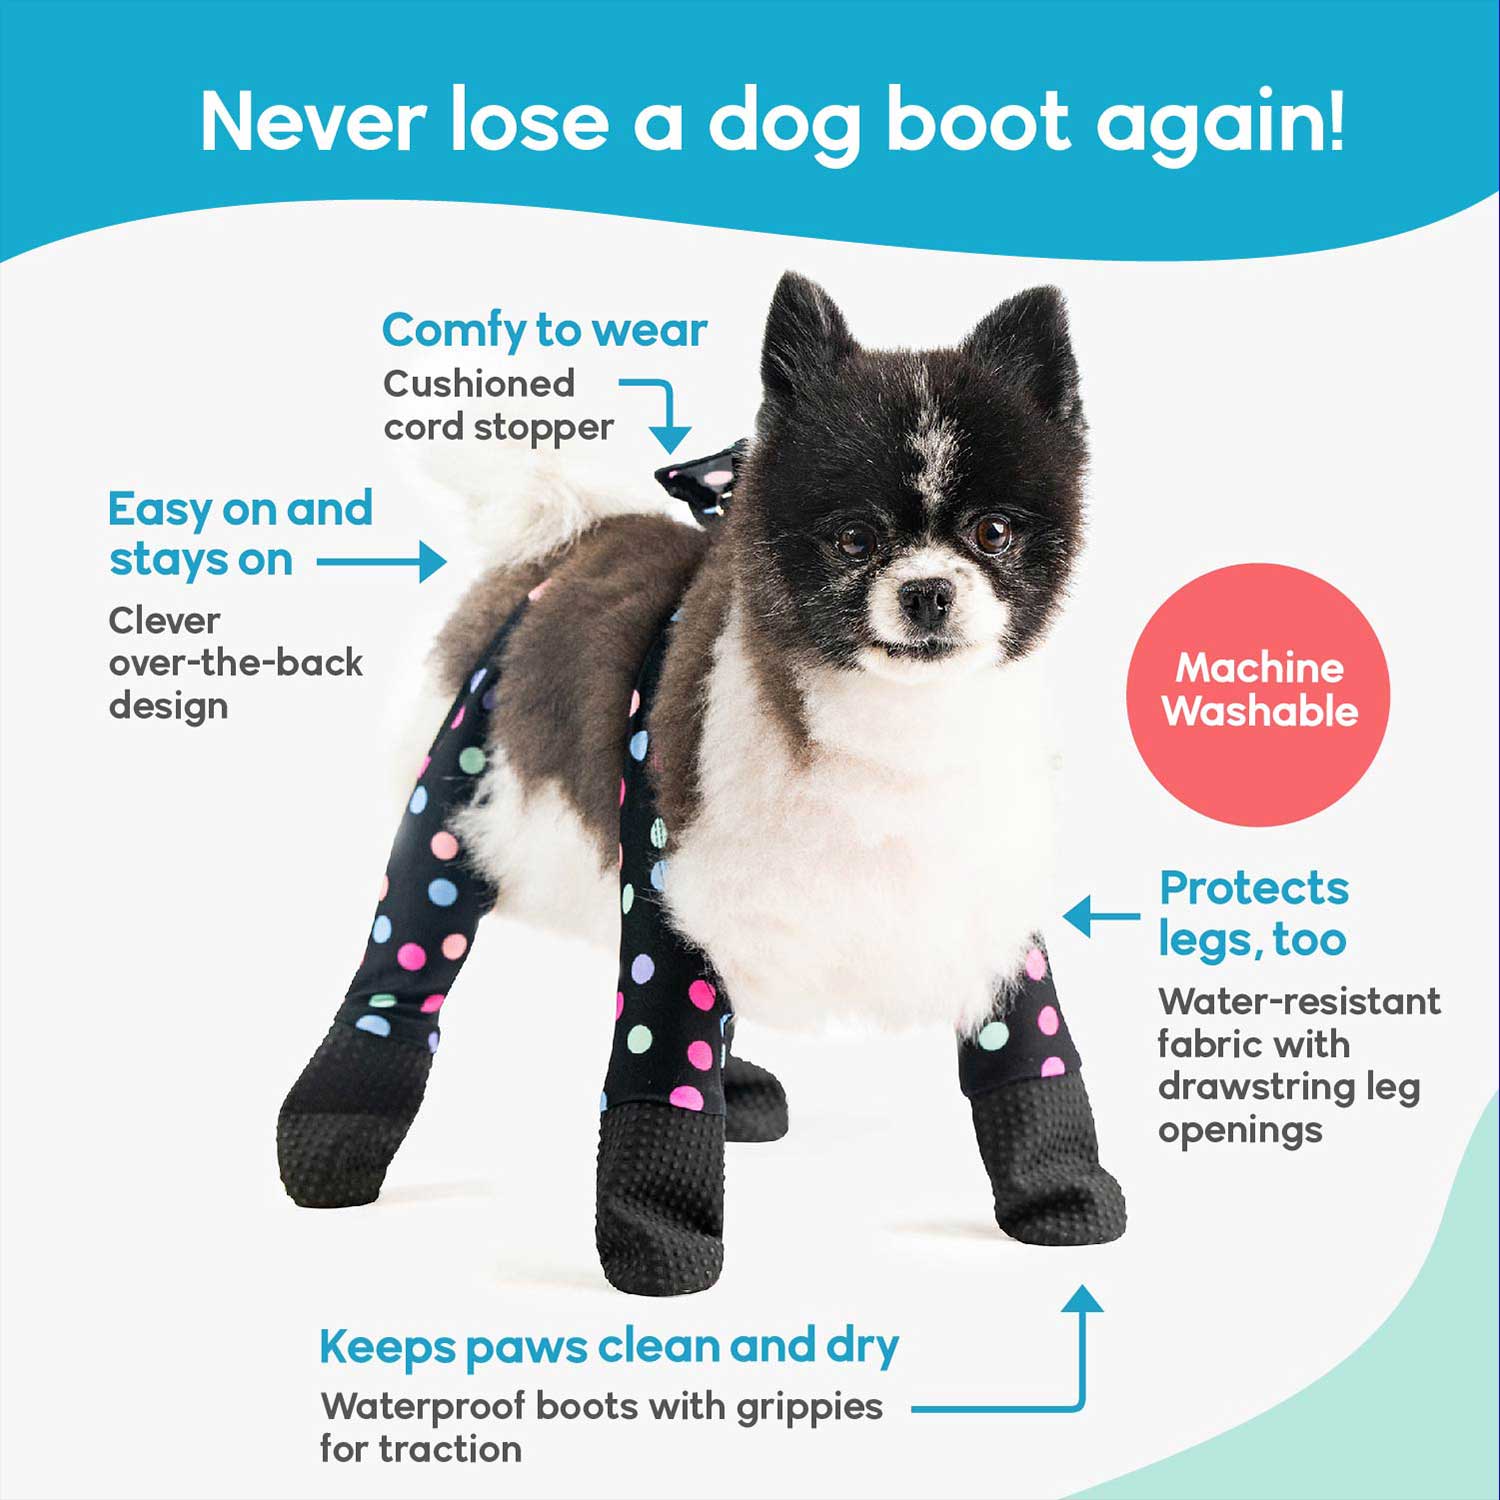 Buy Walkee Paws Waterproof Dog Leggings, Keep Dog's Paws and Legs Clean &  Dry On Walks, Protect Paws from Spring Rain & Summer Heat